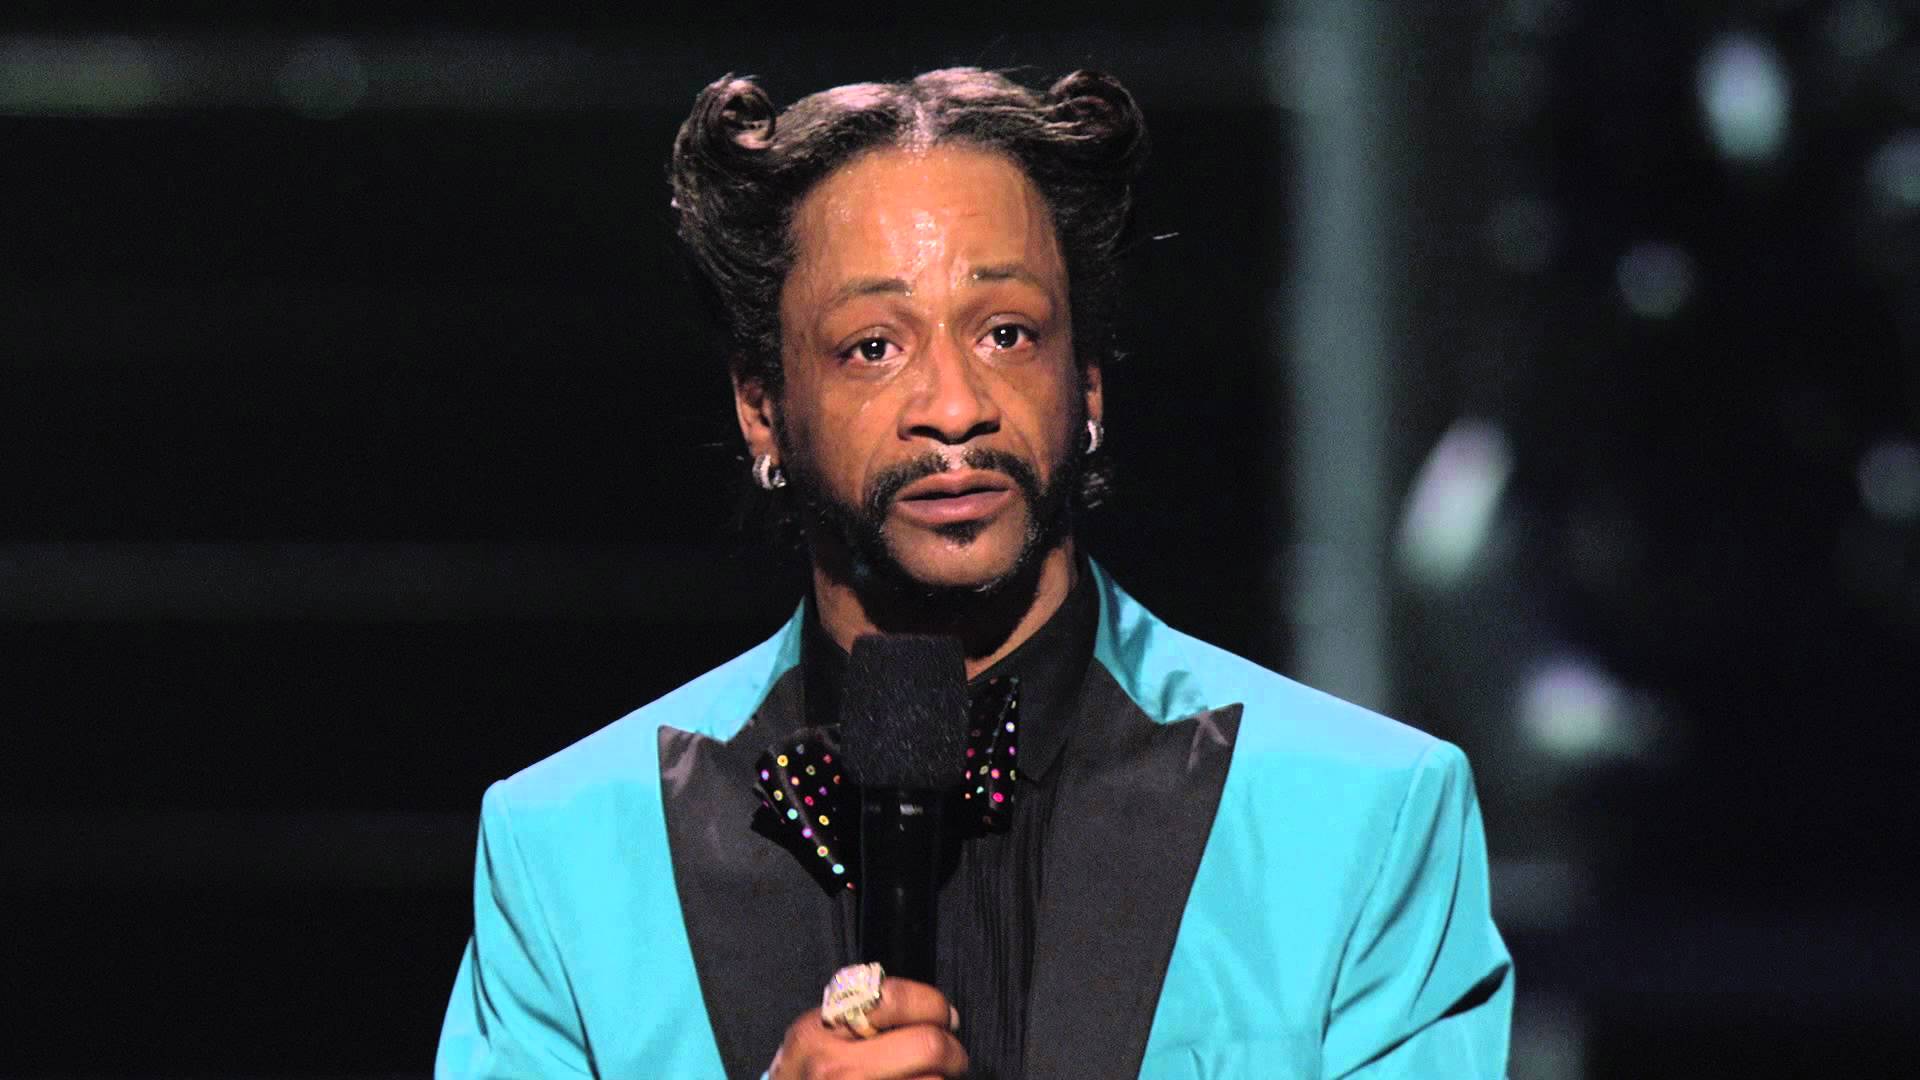 Katt Williams Explains Fight With Teenager During New StandUp Routine